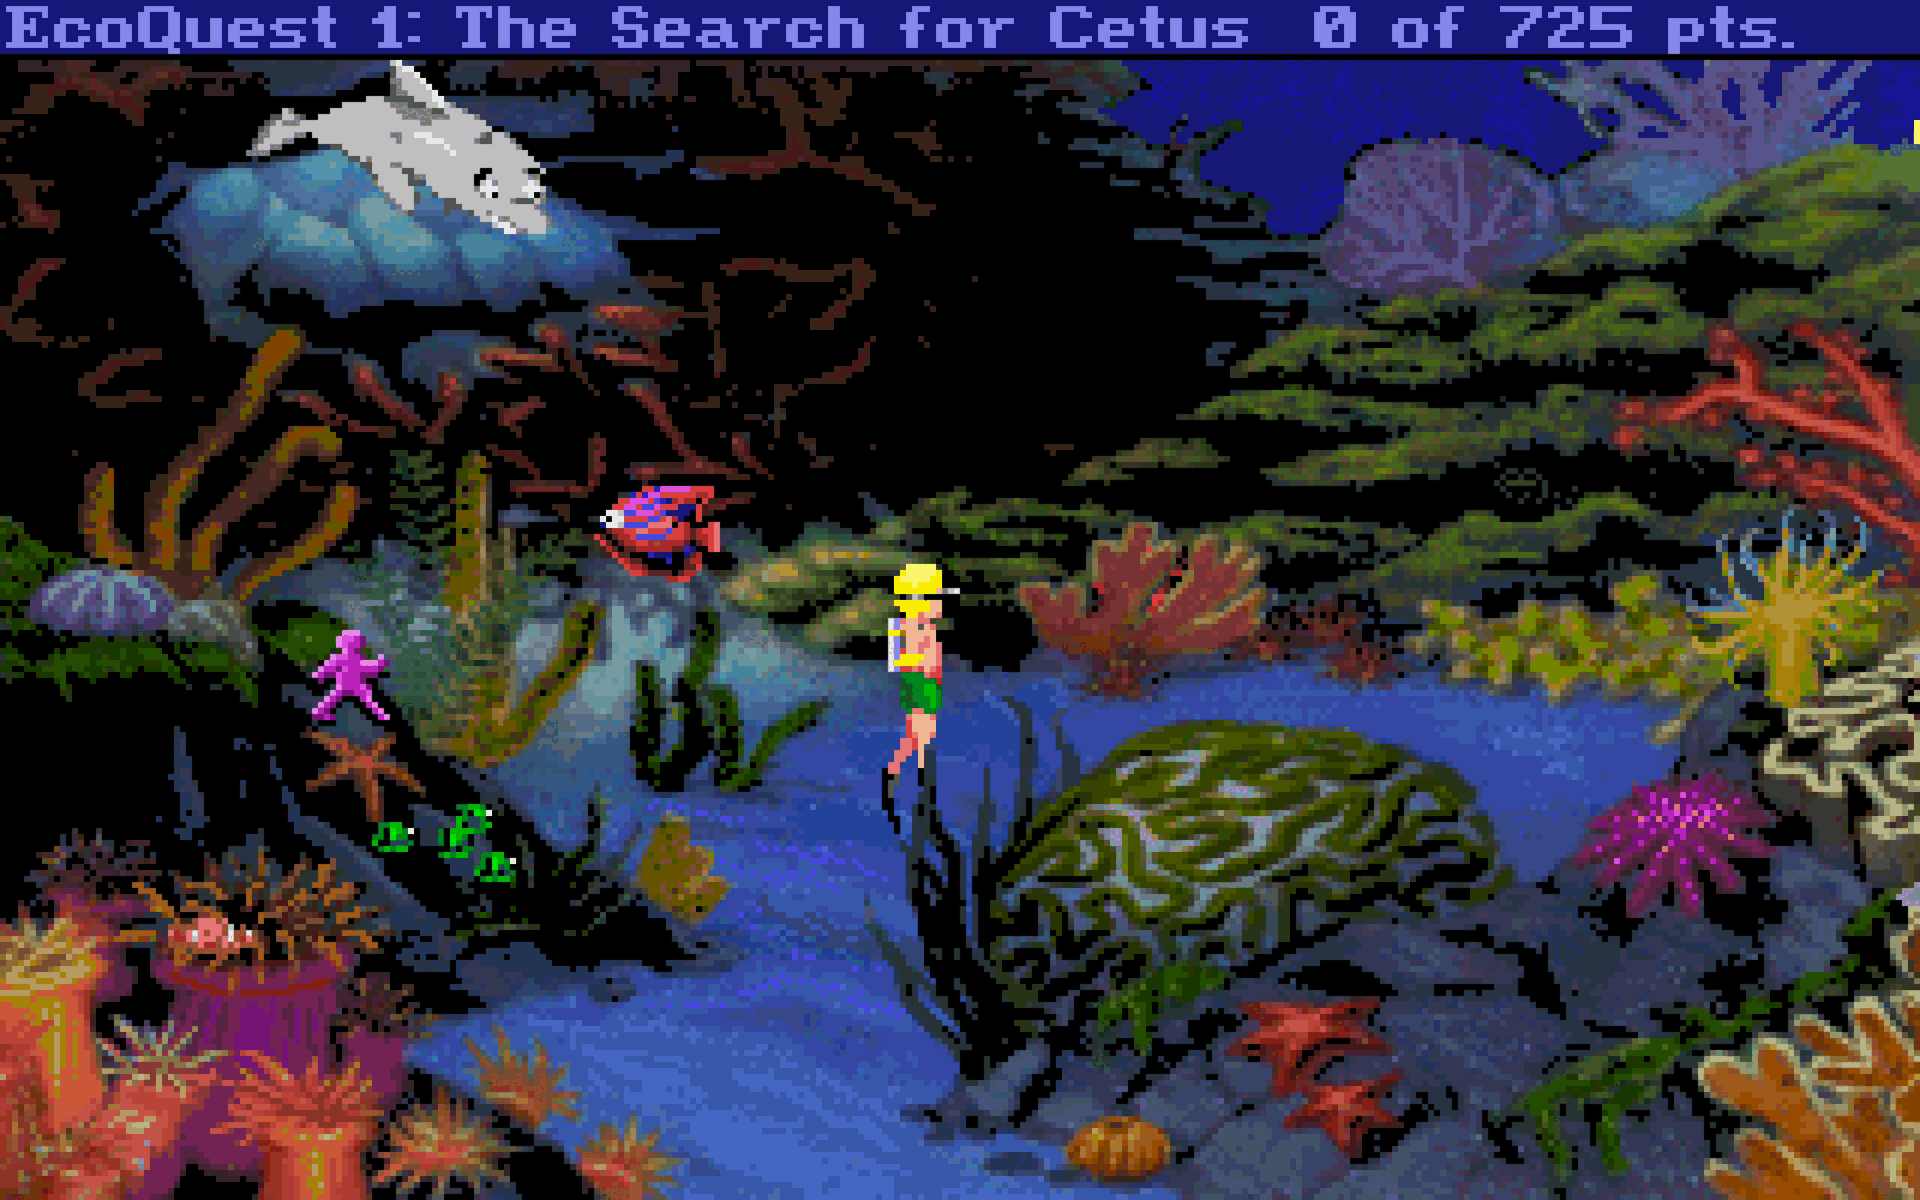 Example gif showing how palette issues in the CD version diminish the beautiful backgrounds.